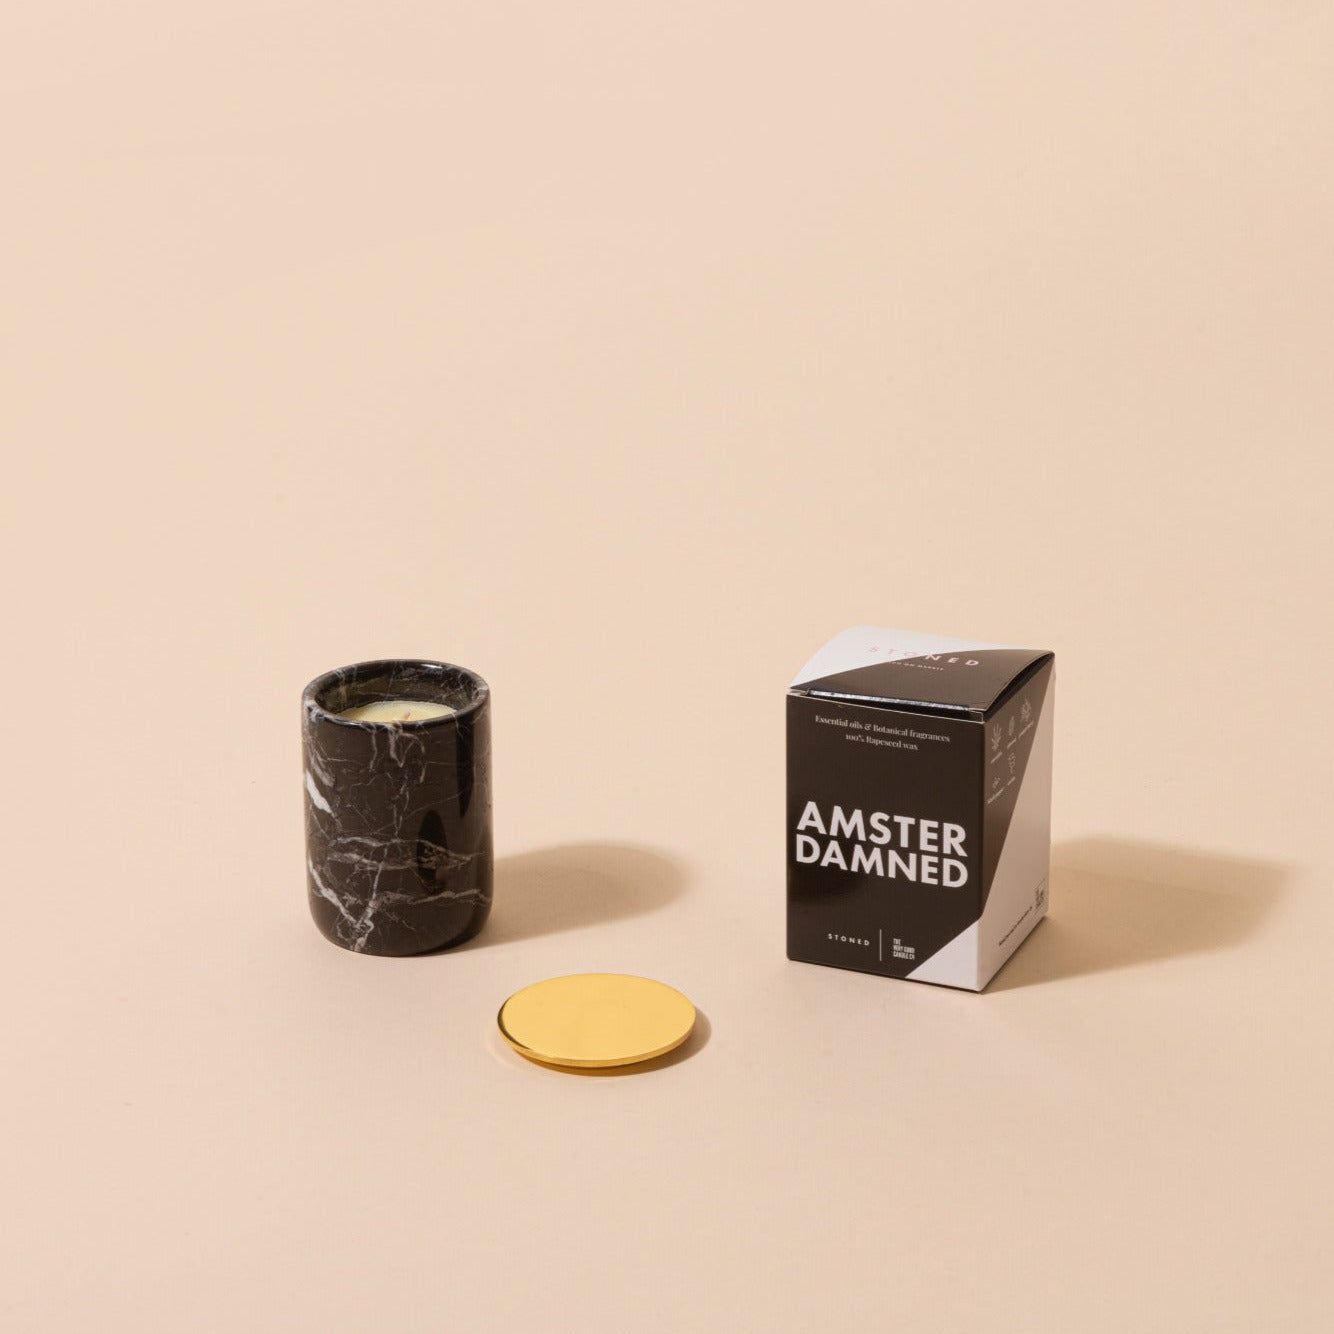 Black Marble Scented Candle 'Amsterdamned' S